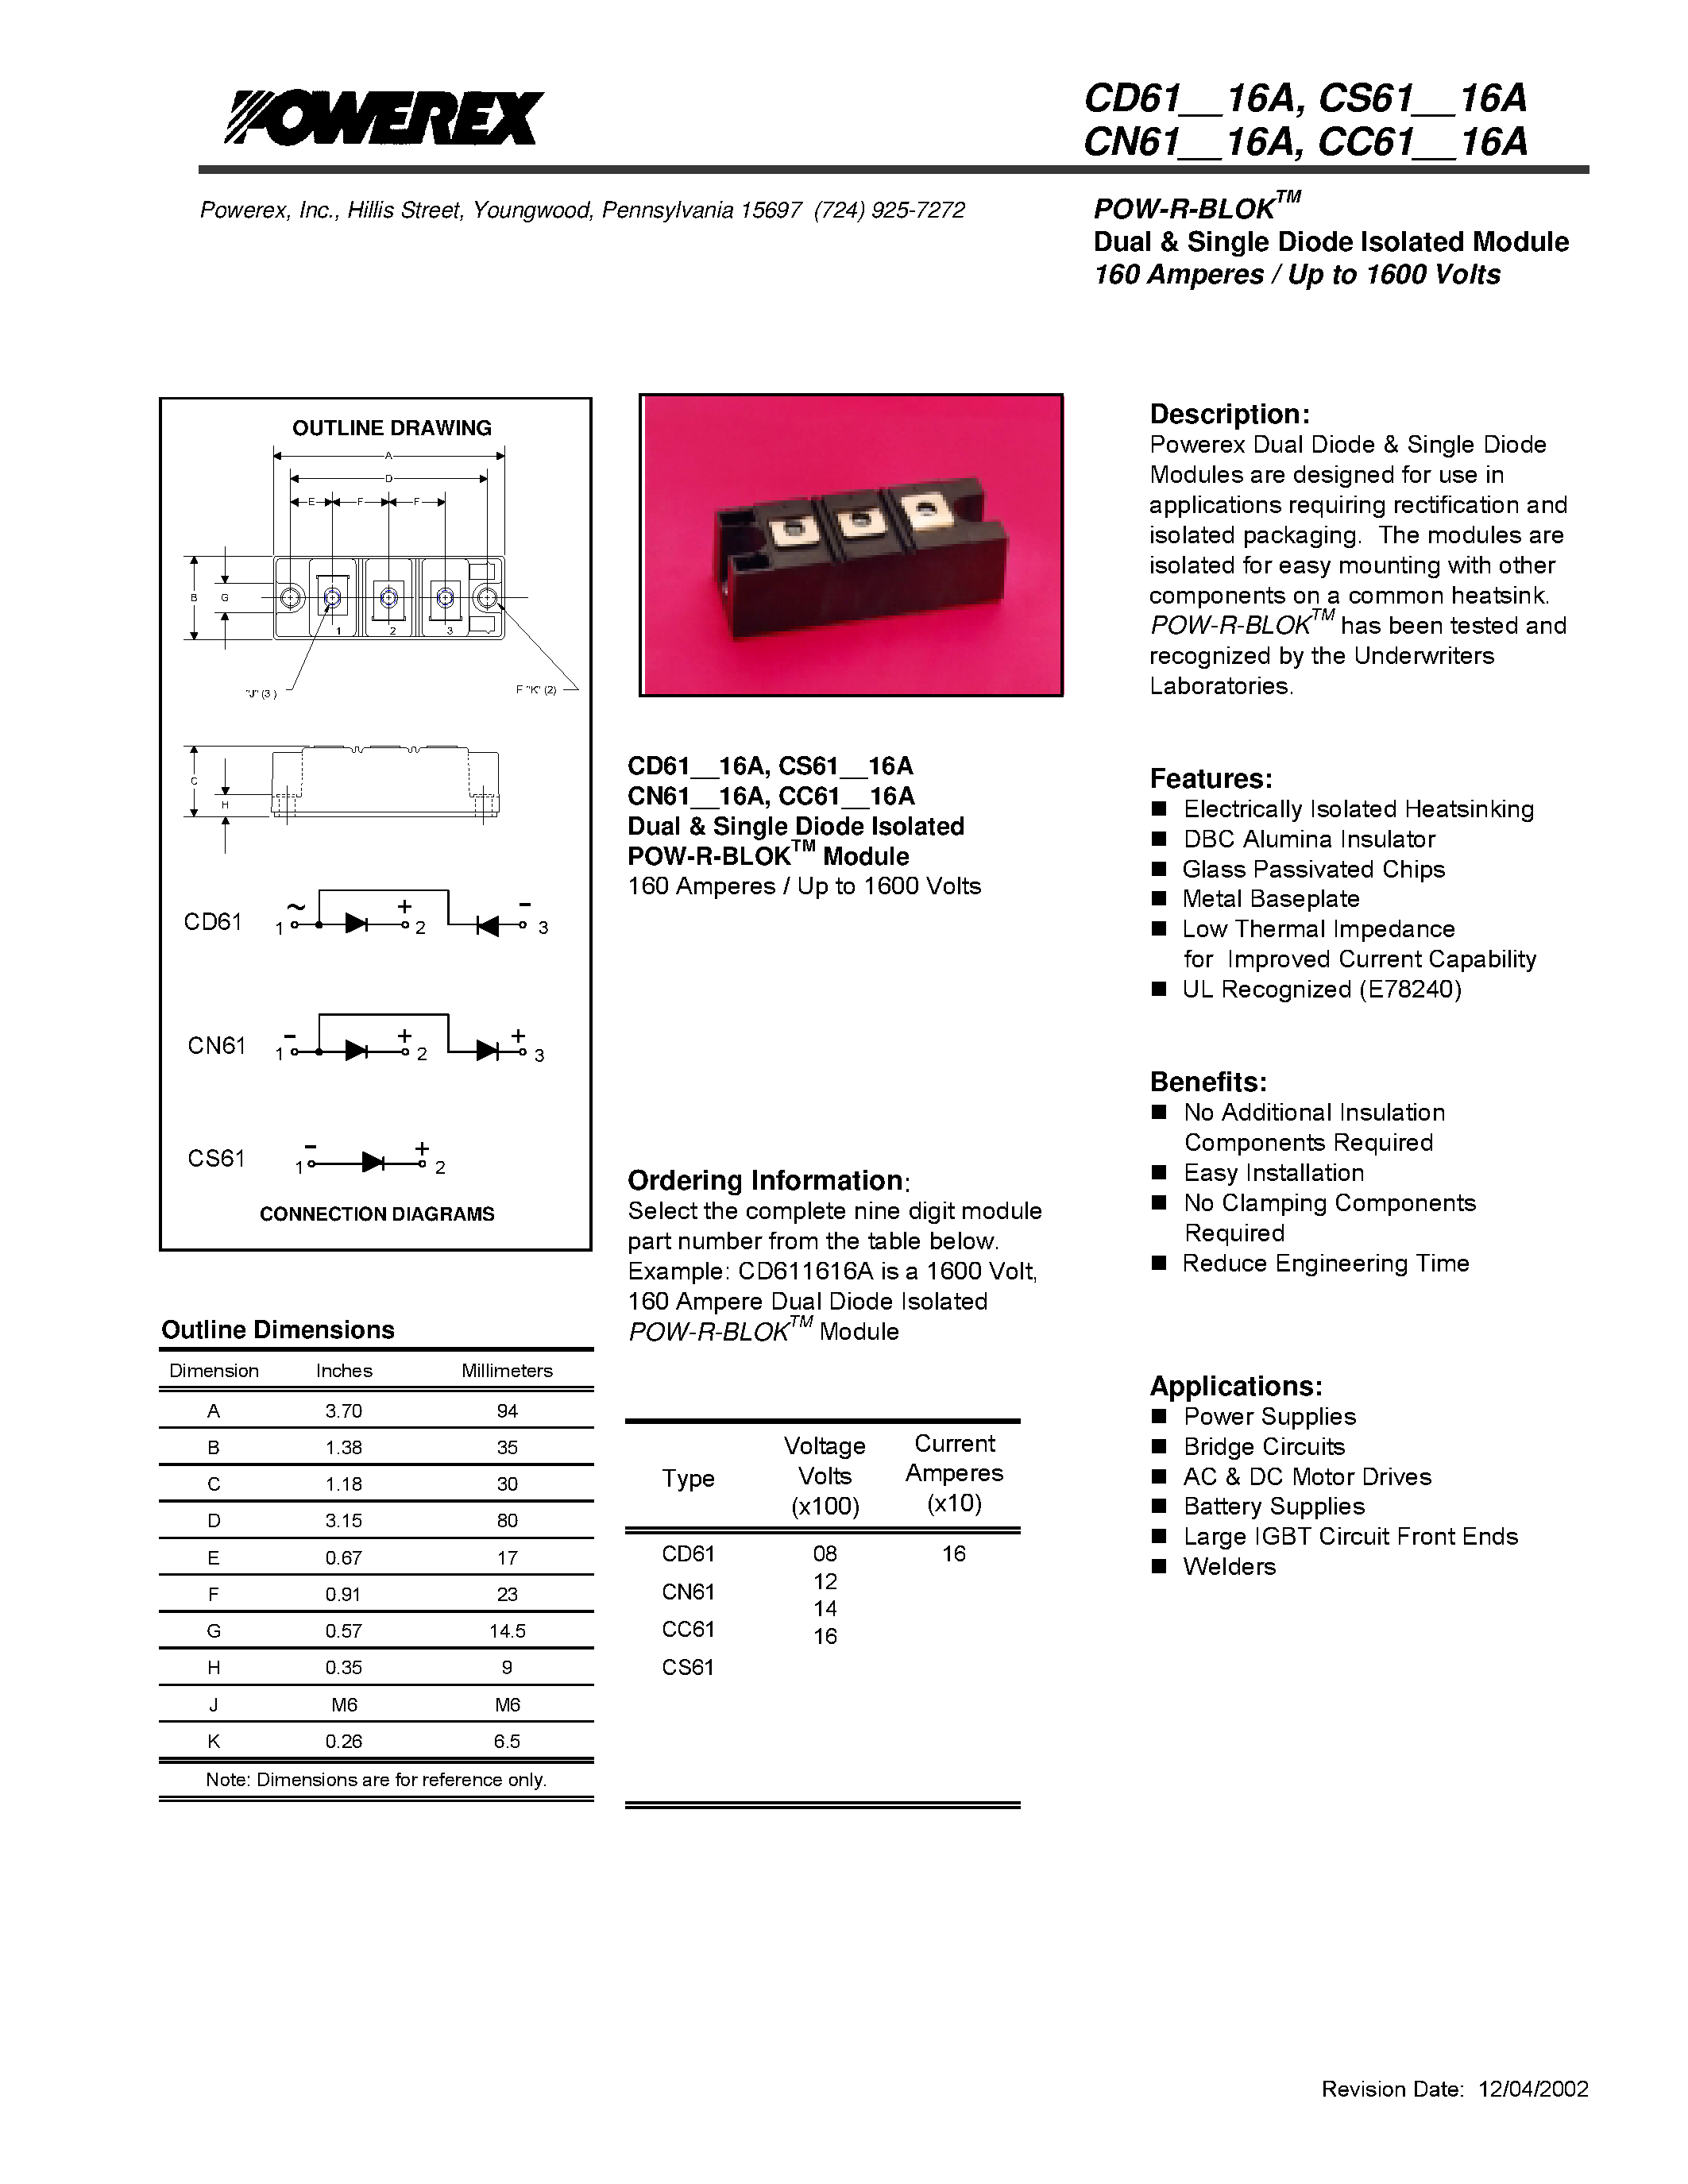 Datasheet CD611616 - POW-R-BLOK Dual & Single Diode Isolated Module 160 Amperes / Up to 1600 Volts page 1